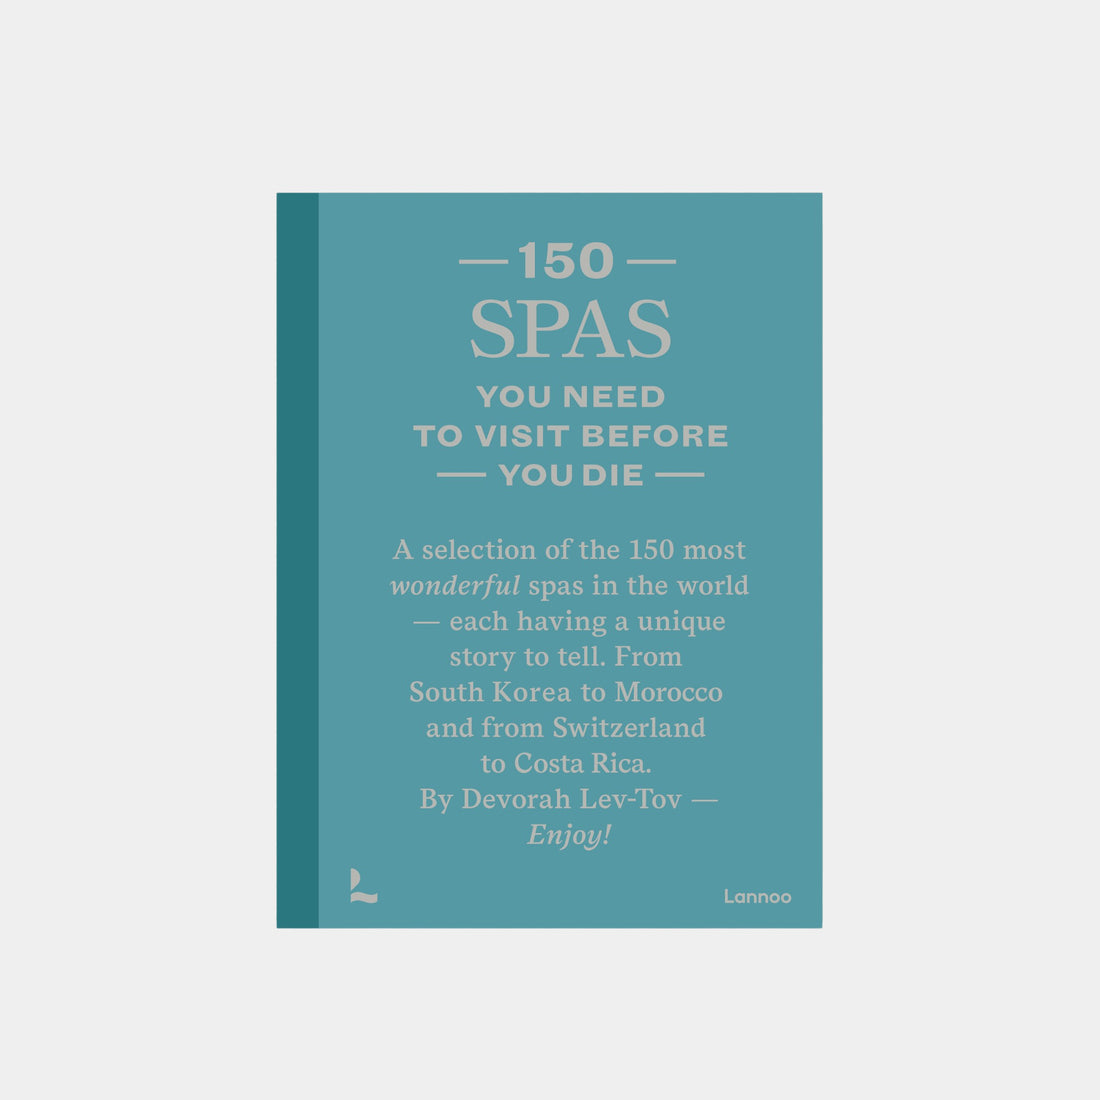 150 Spas you need to visit before you die